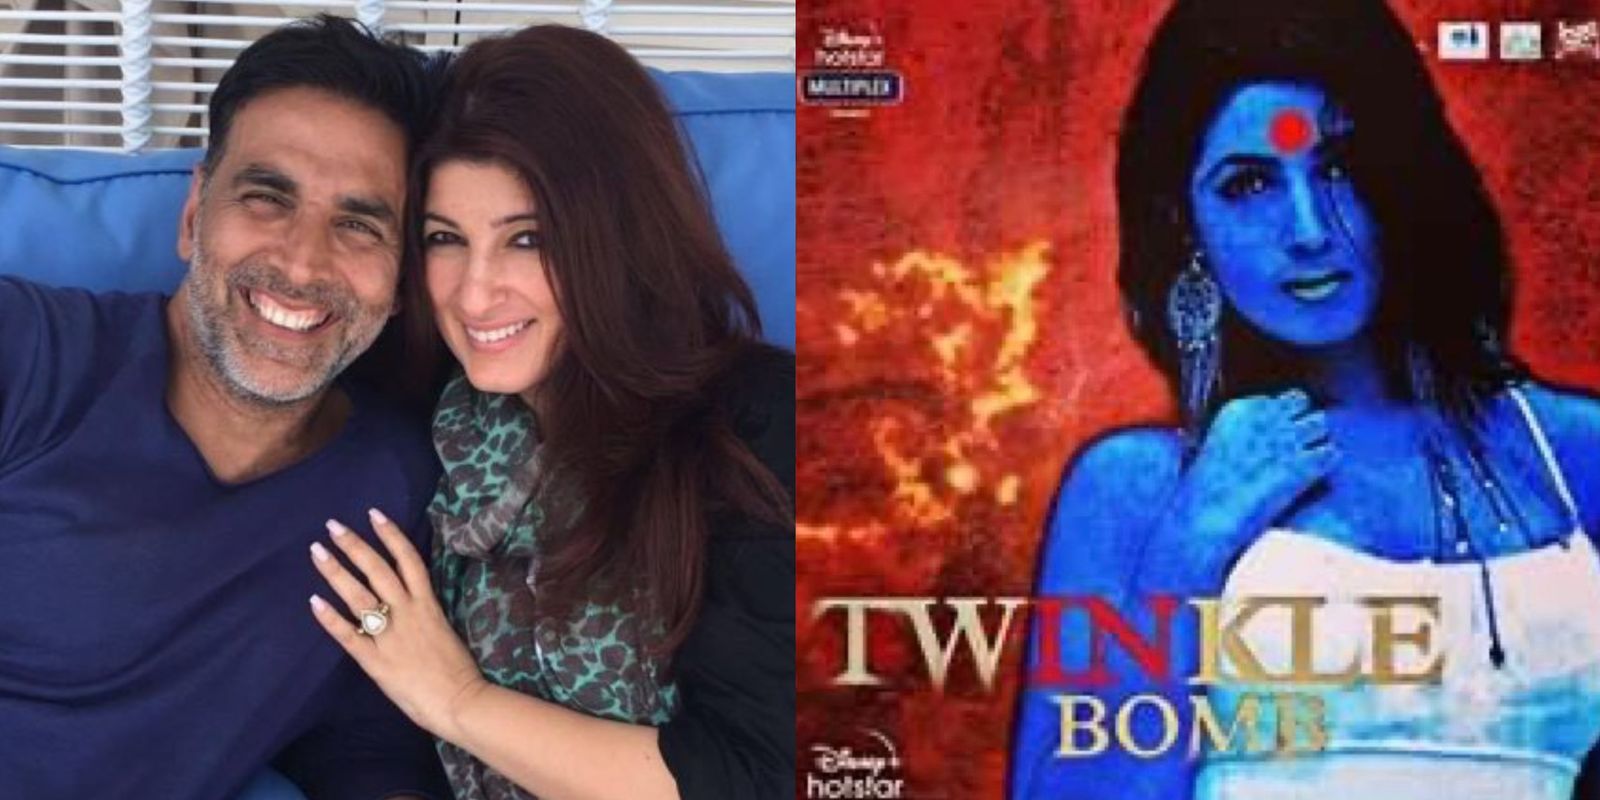 Twinkle Khanna’s Reaction To A Meme Calling Her ‘Twinkle Bomb’ Will Leave You In Splits